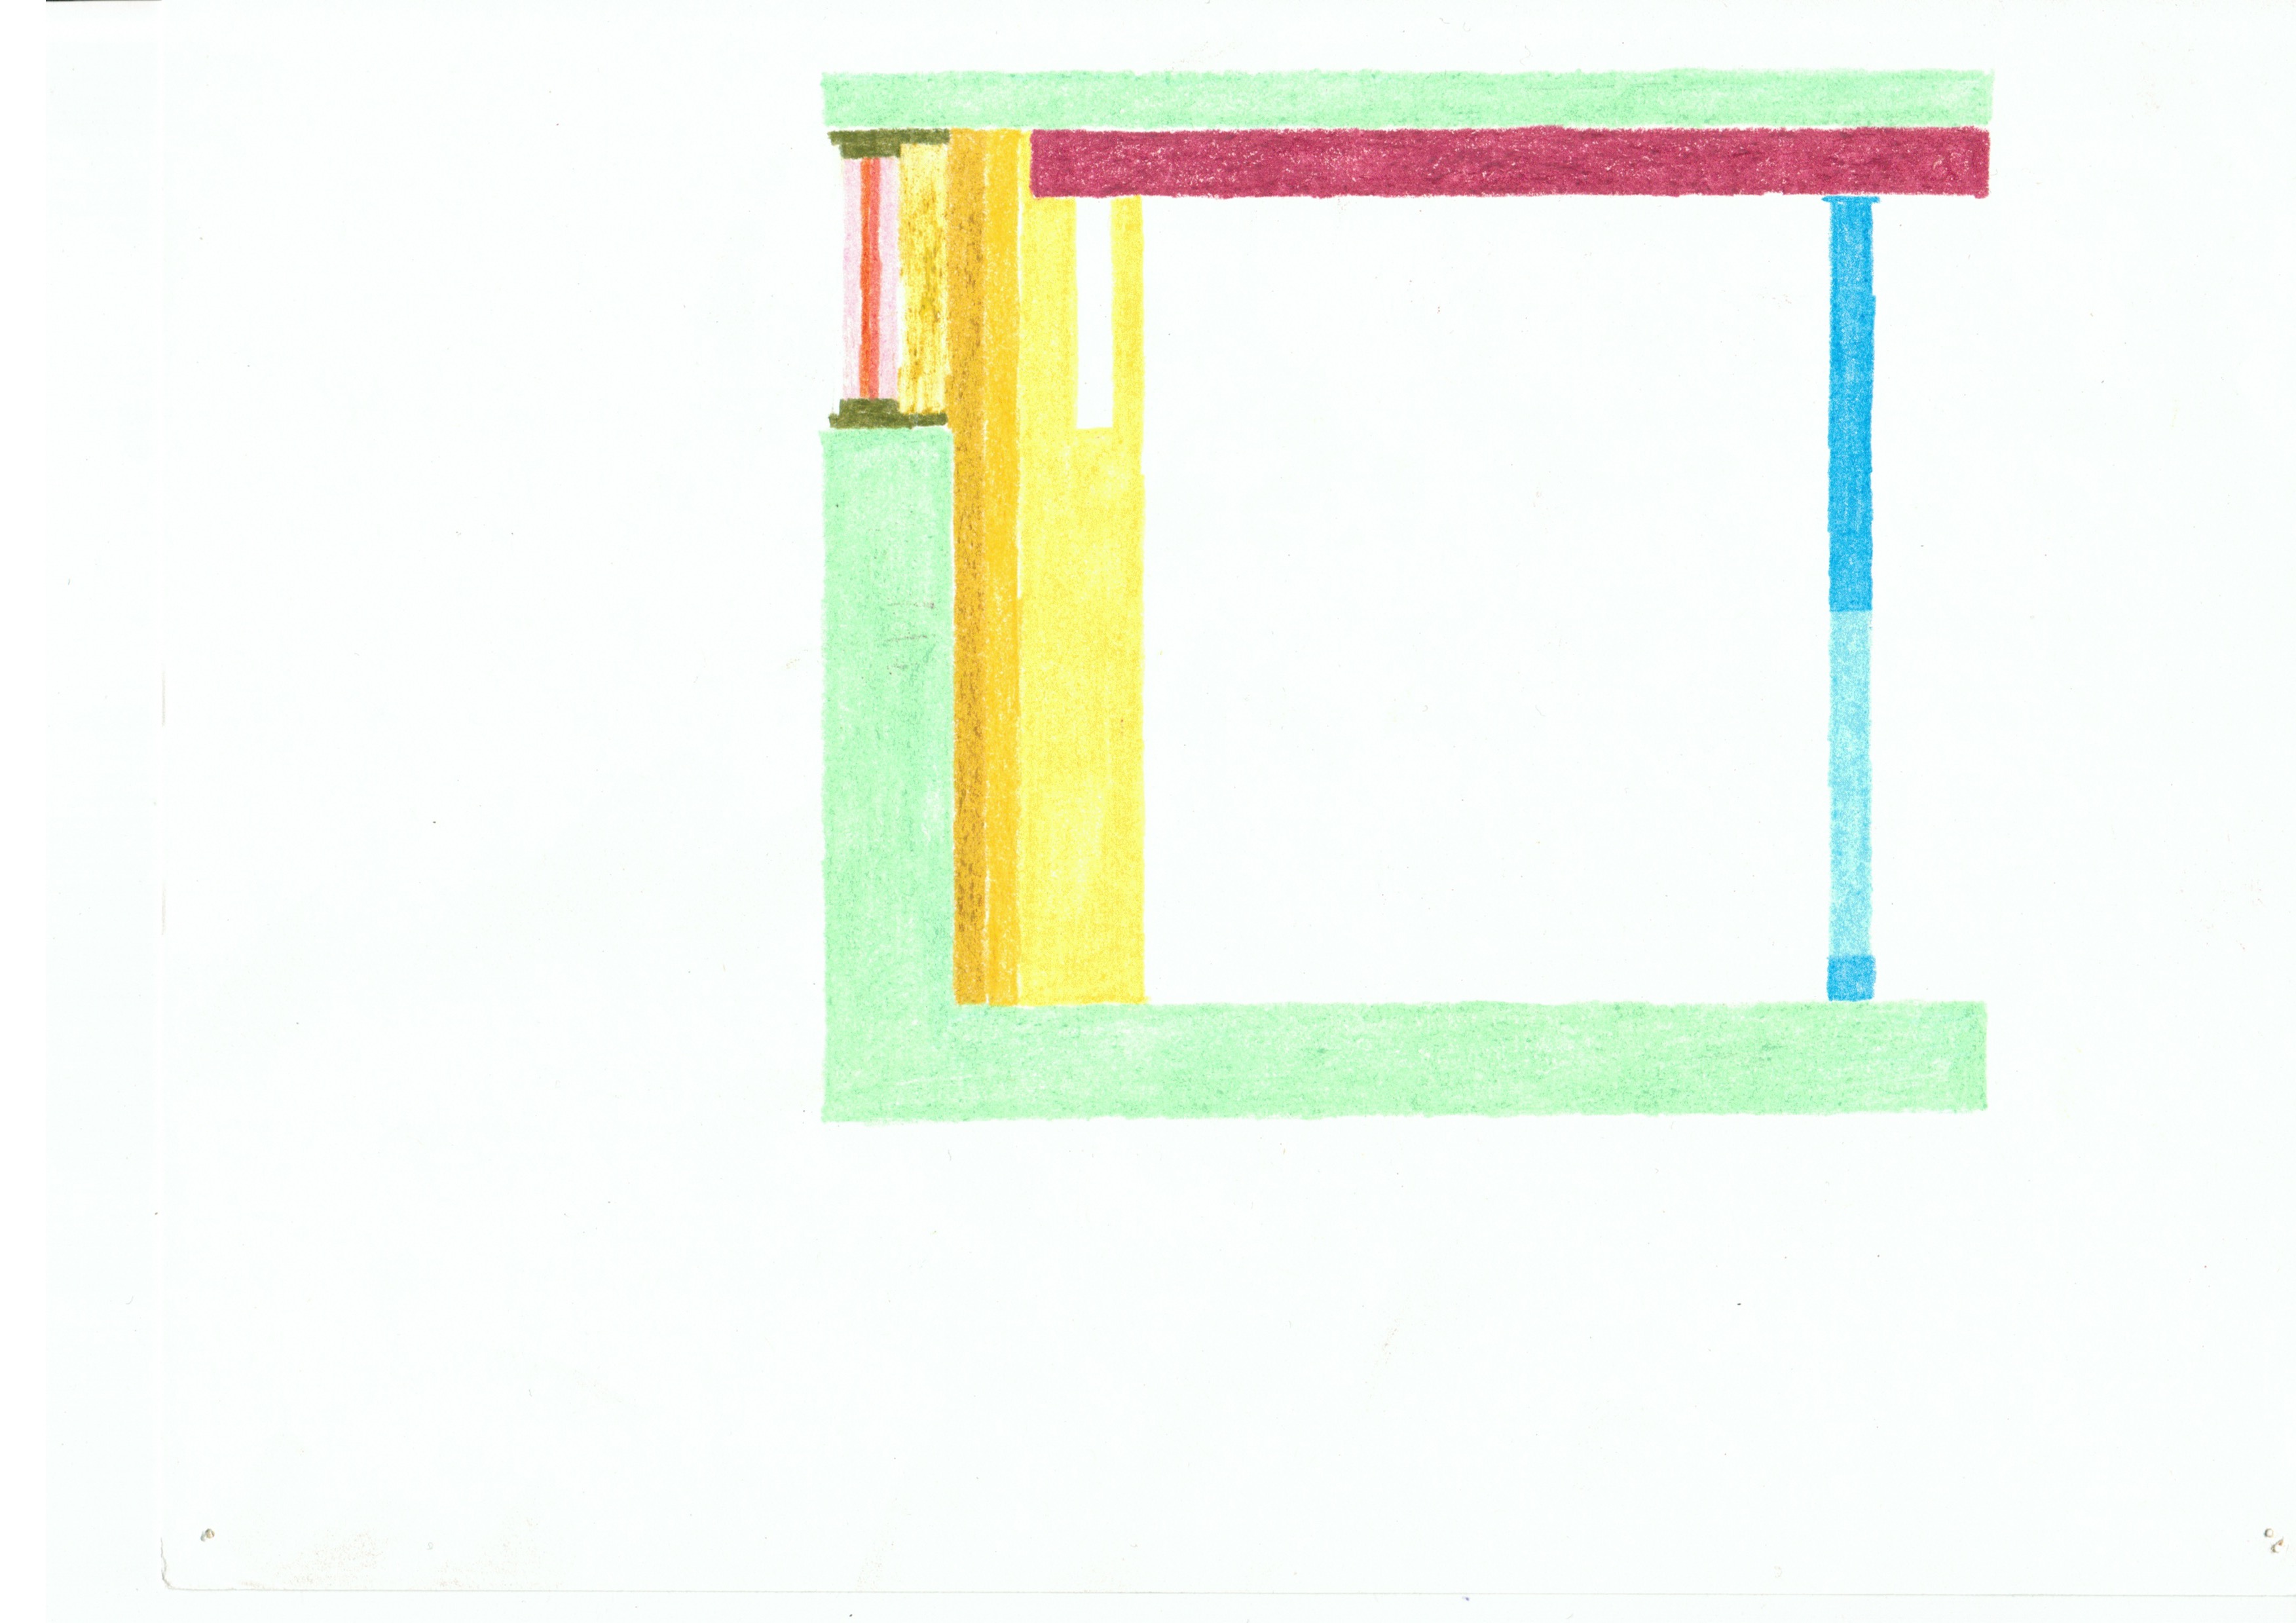 colored pencil sketch of basement window-section